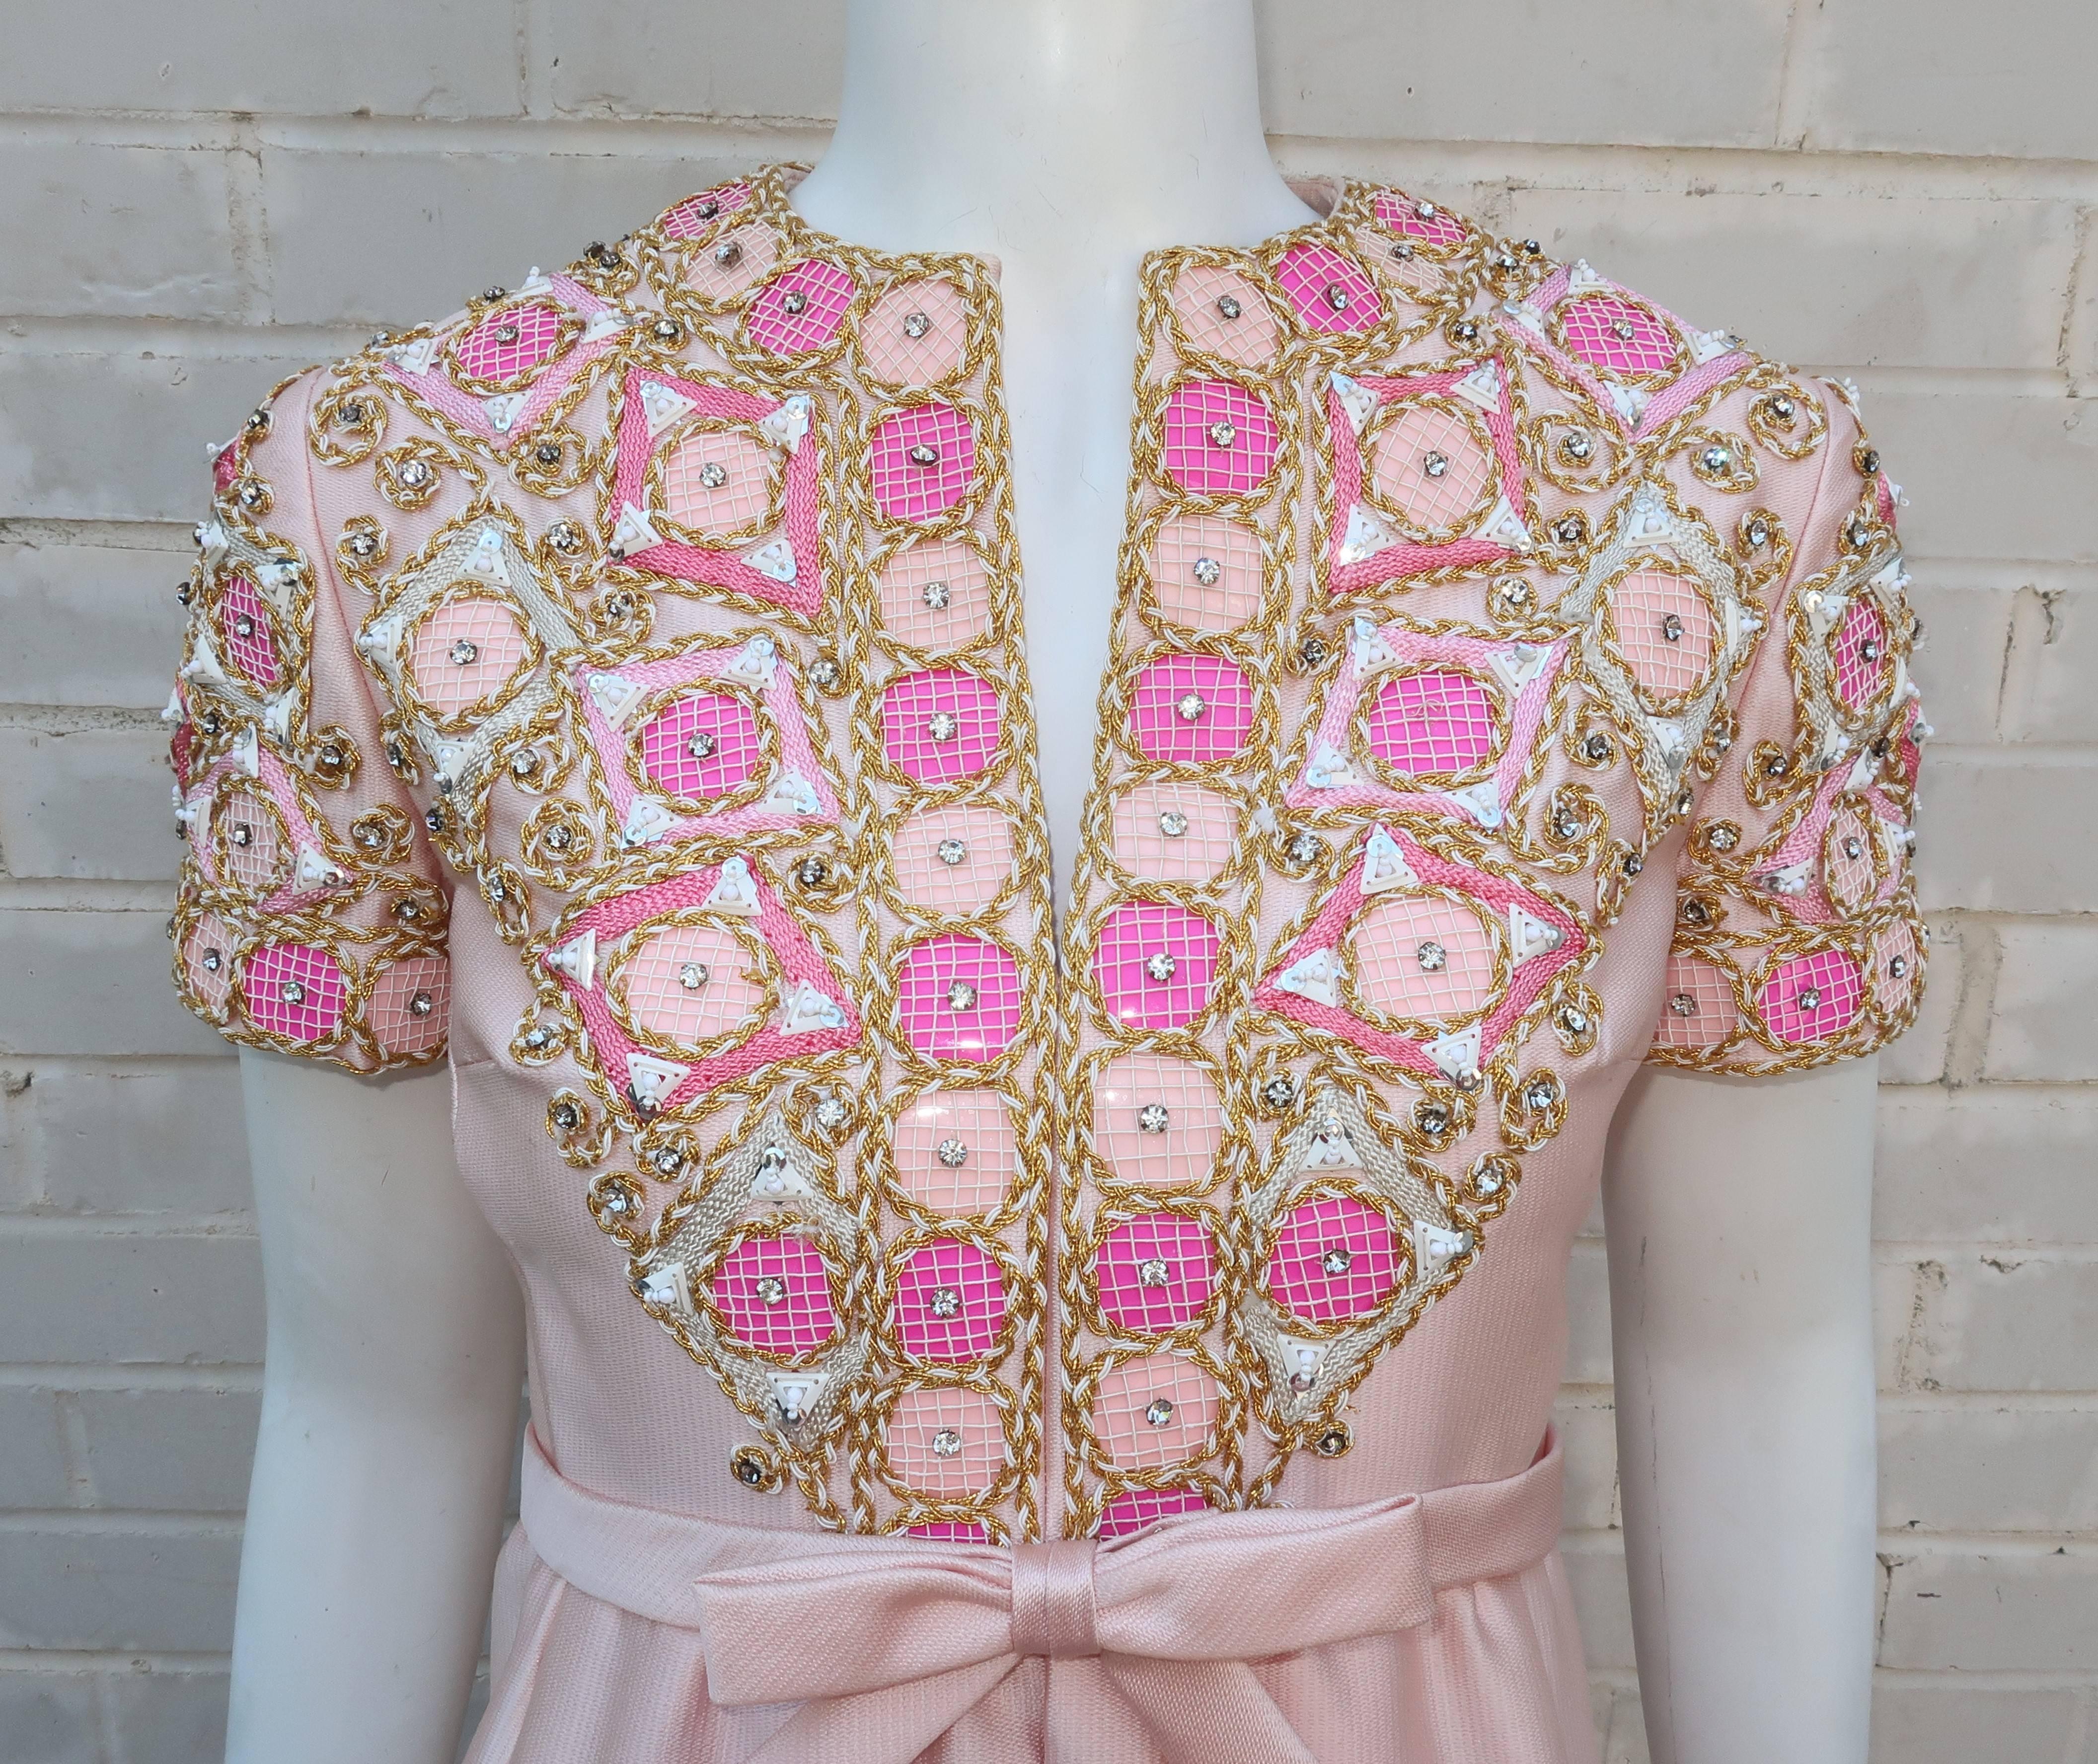 Gray 1960’s Malcolm Starr Pink Beaded Evening Dress With Rhinestones